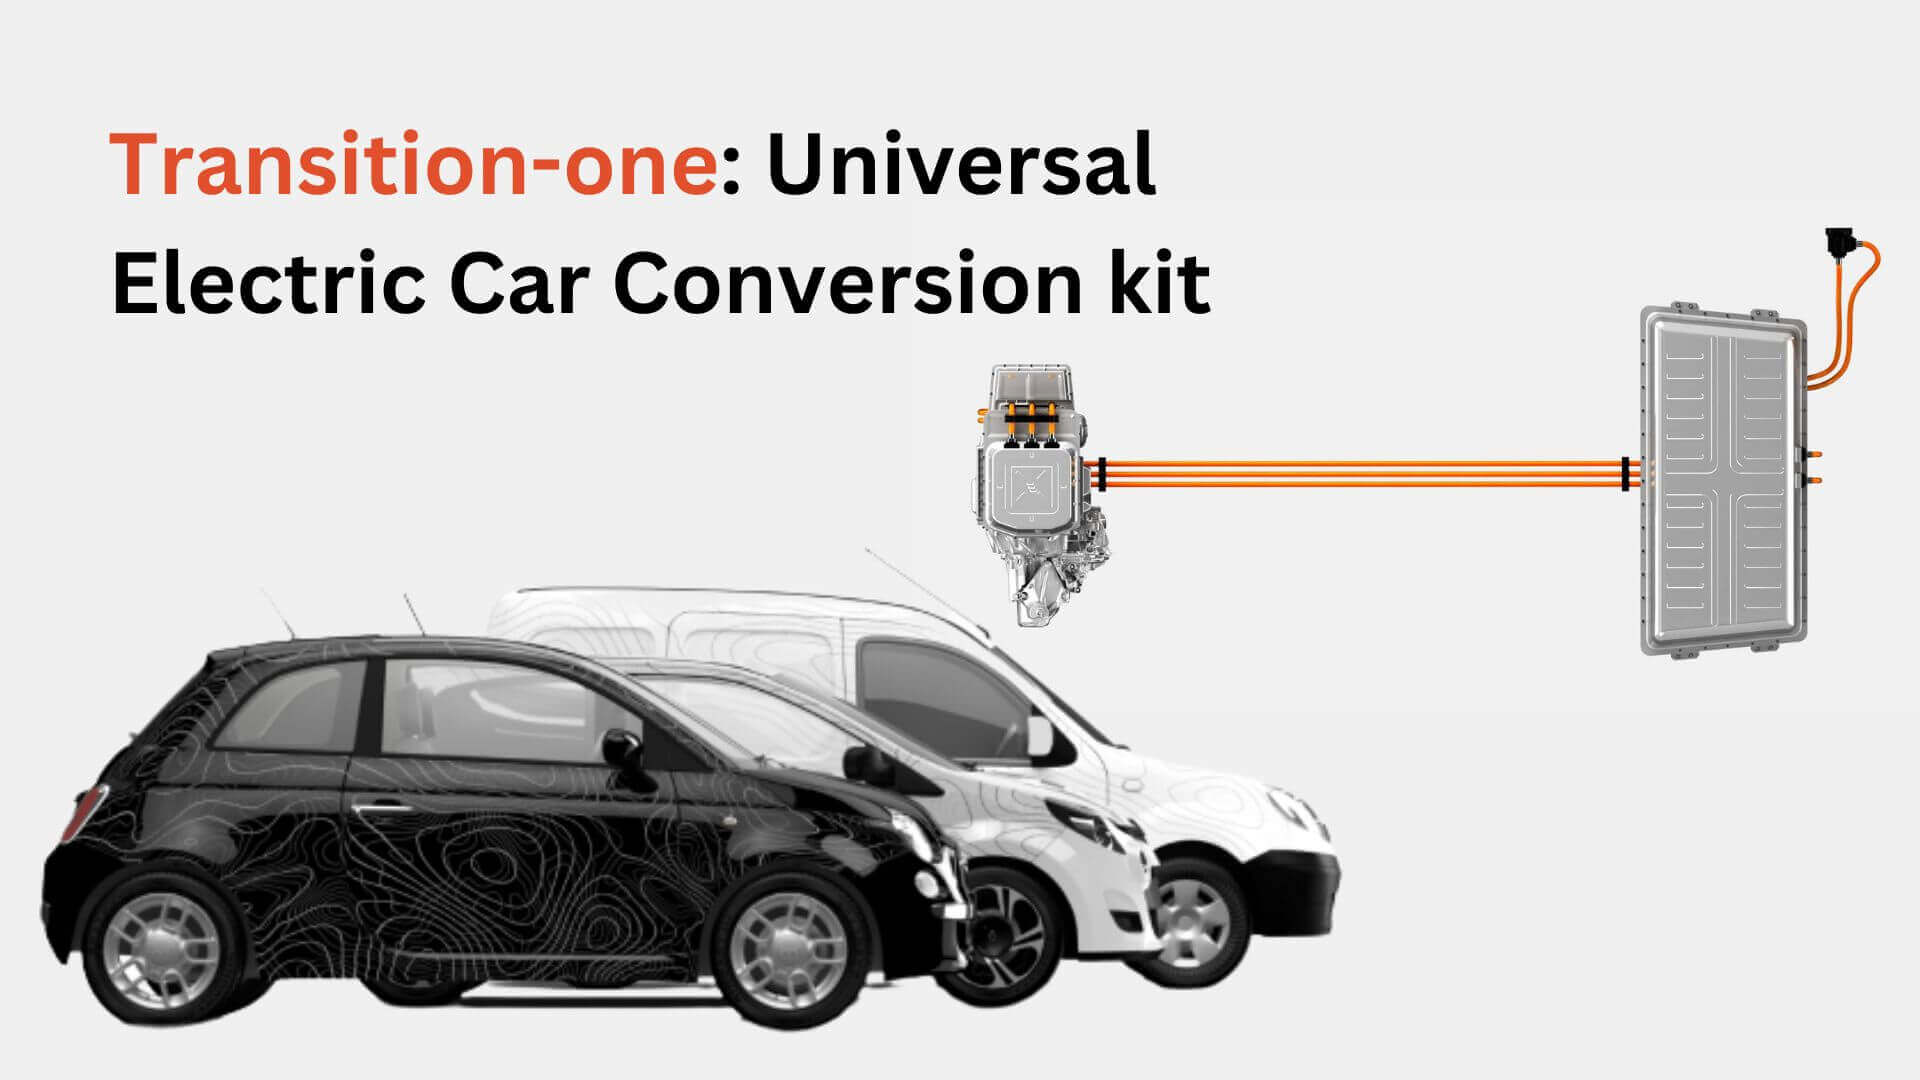 Transition One Universal Electric Car Conversion Kit Cost?